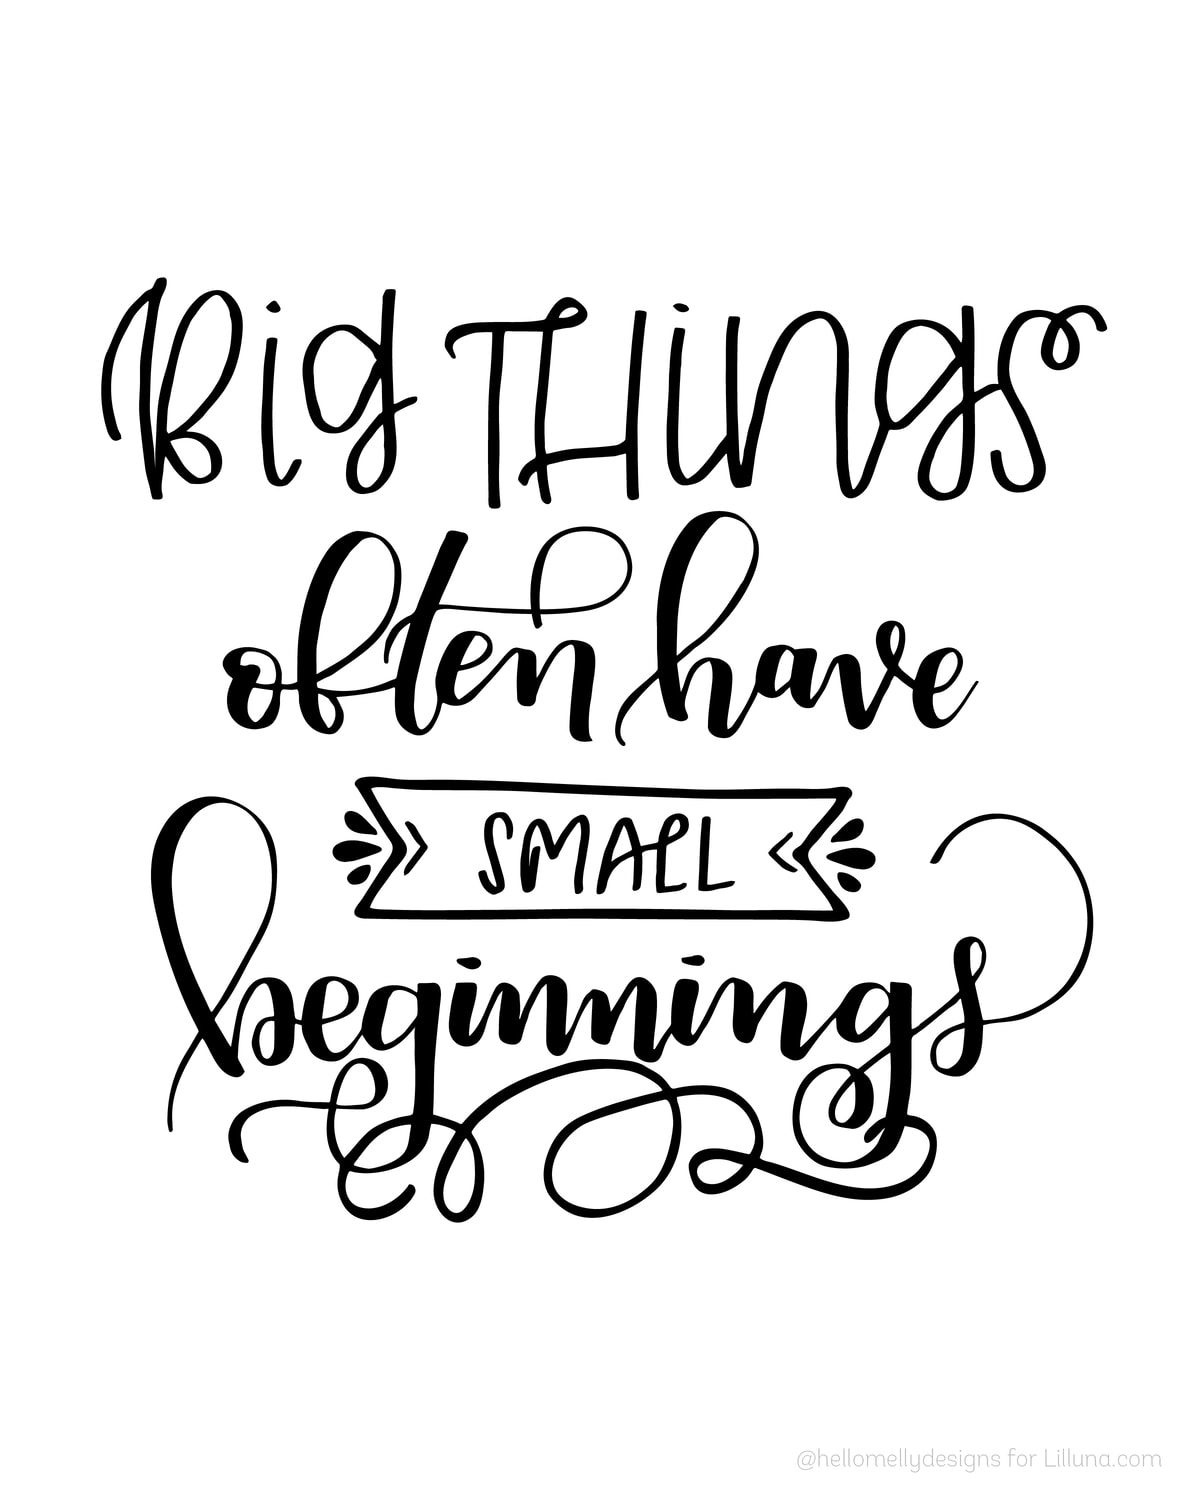 Big things often have small beginnings - LOVE this quote!! Get the free print on lilluna.com. Stick in a frame and use for cute decor!!